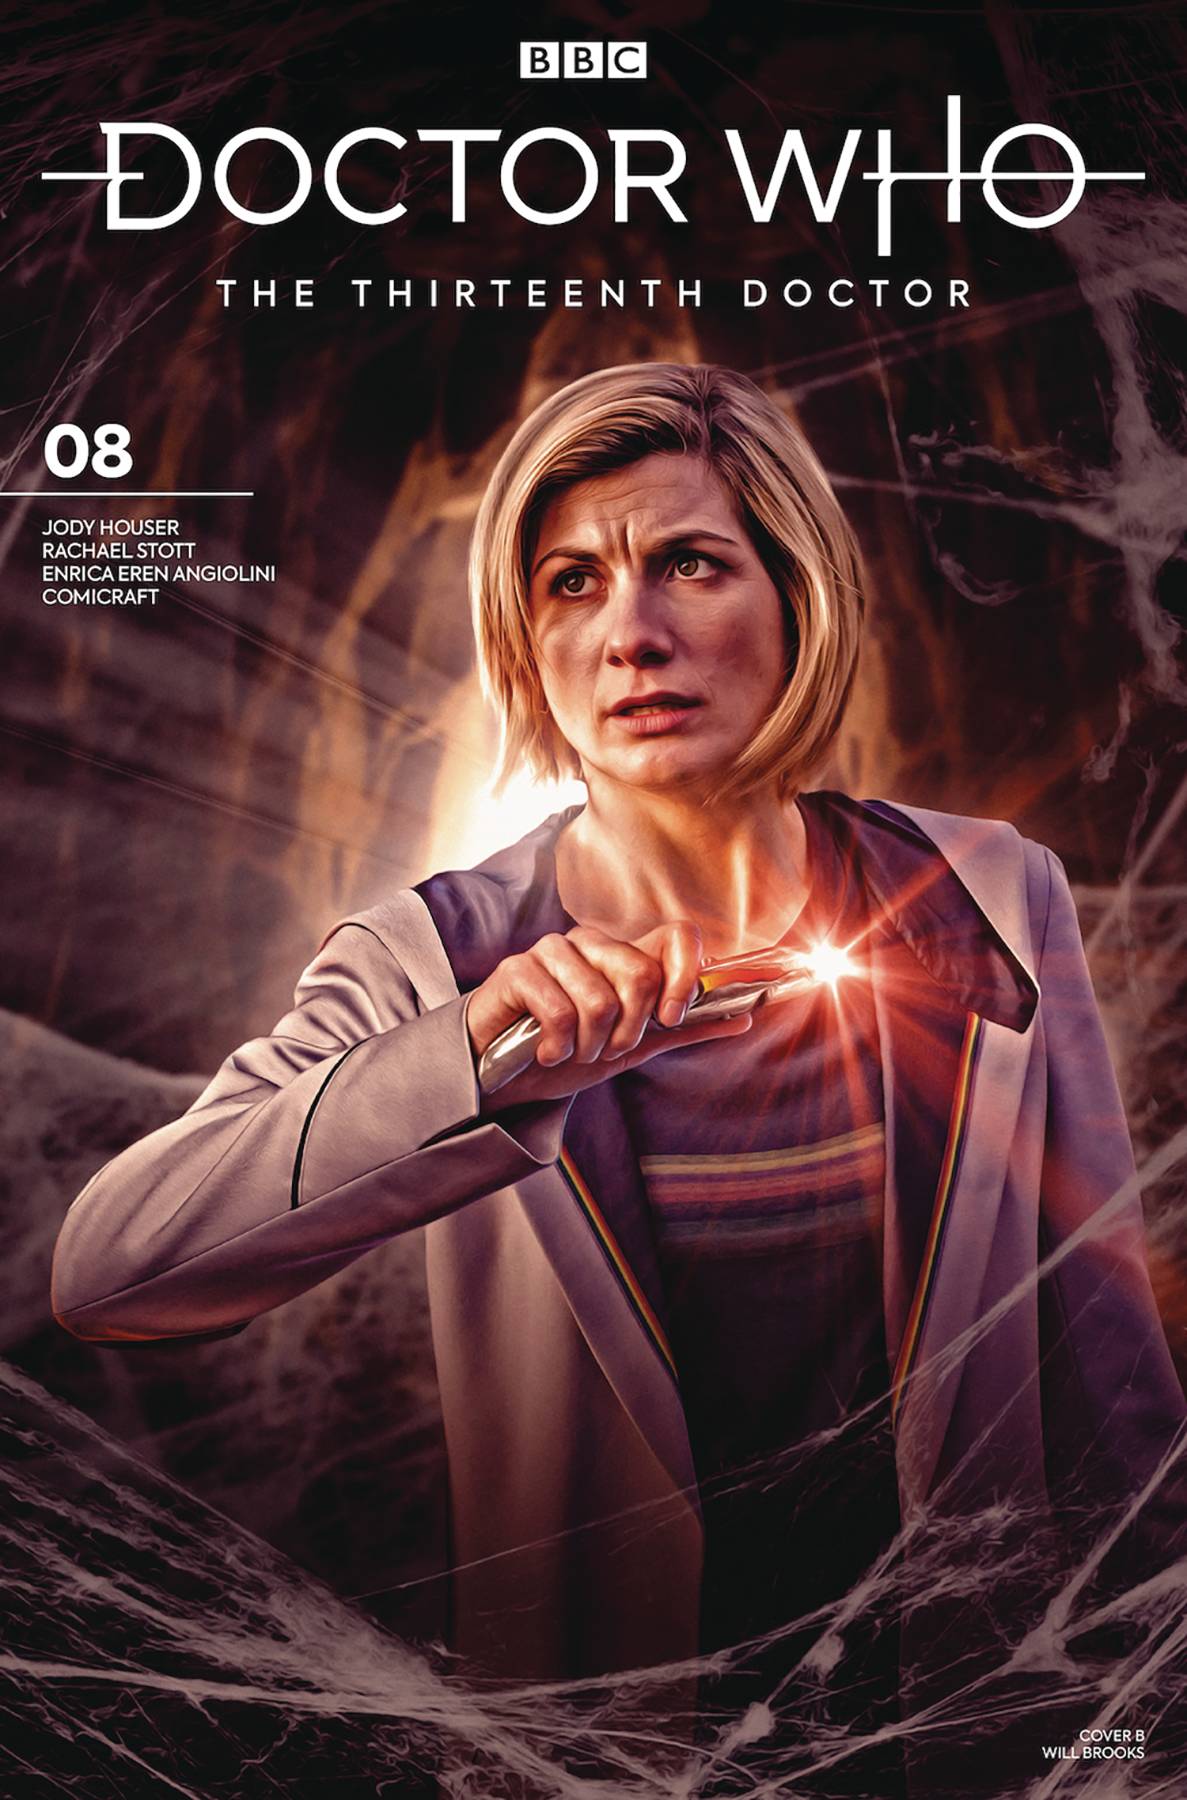 Doctor Who 13th #8 Cover B Photo